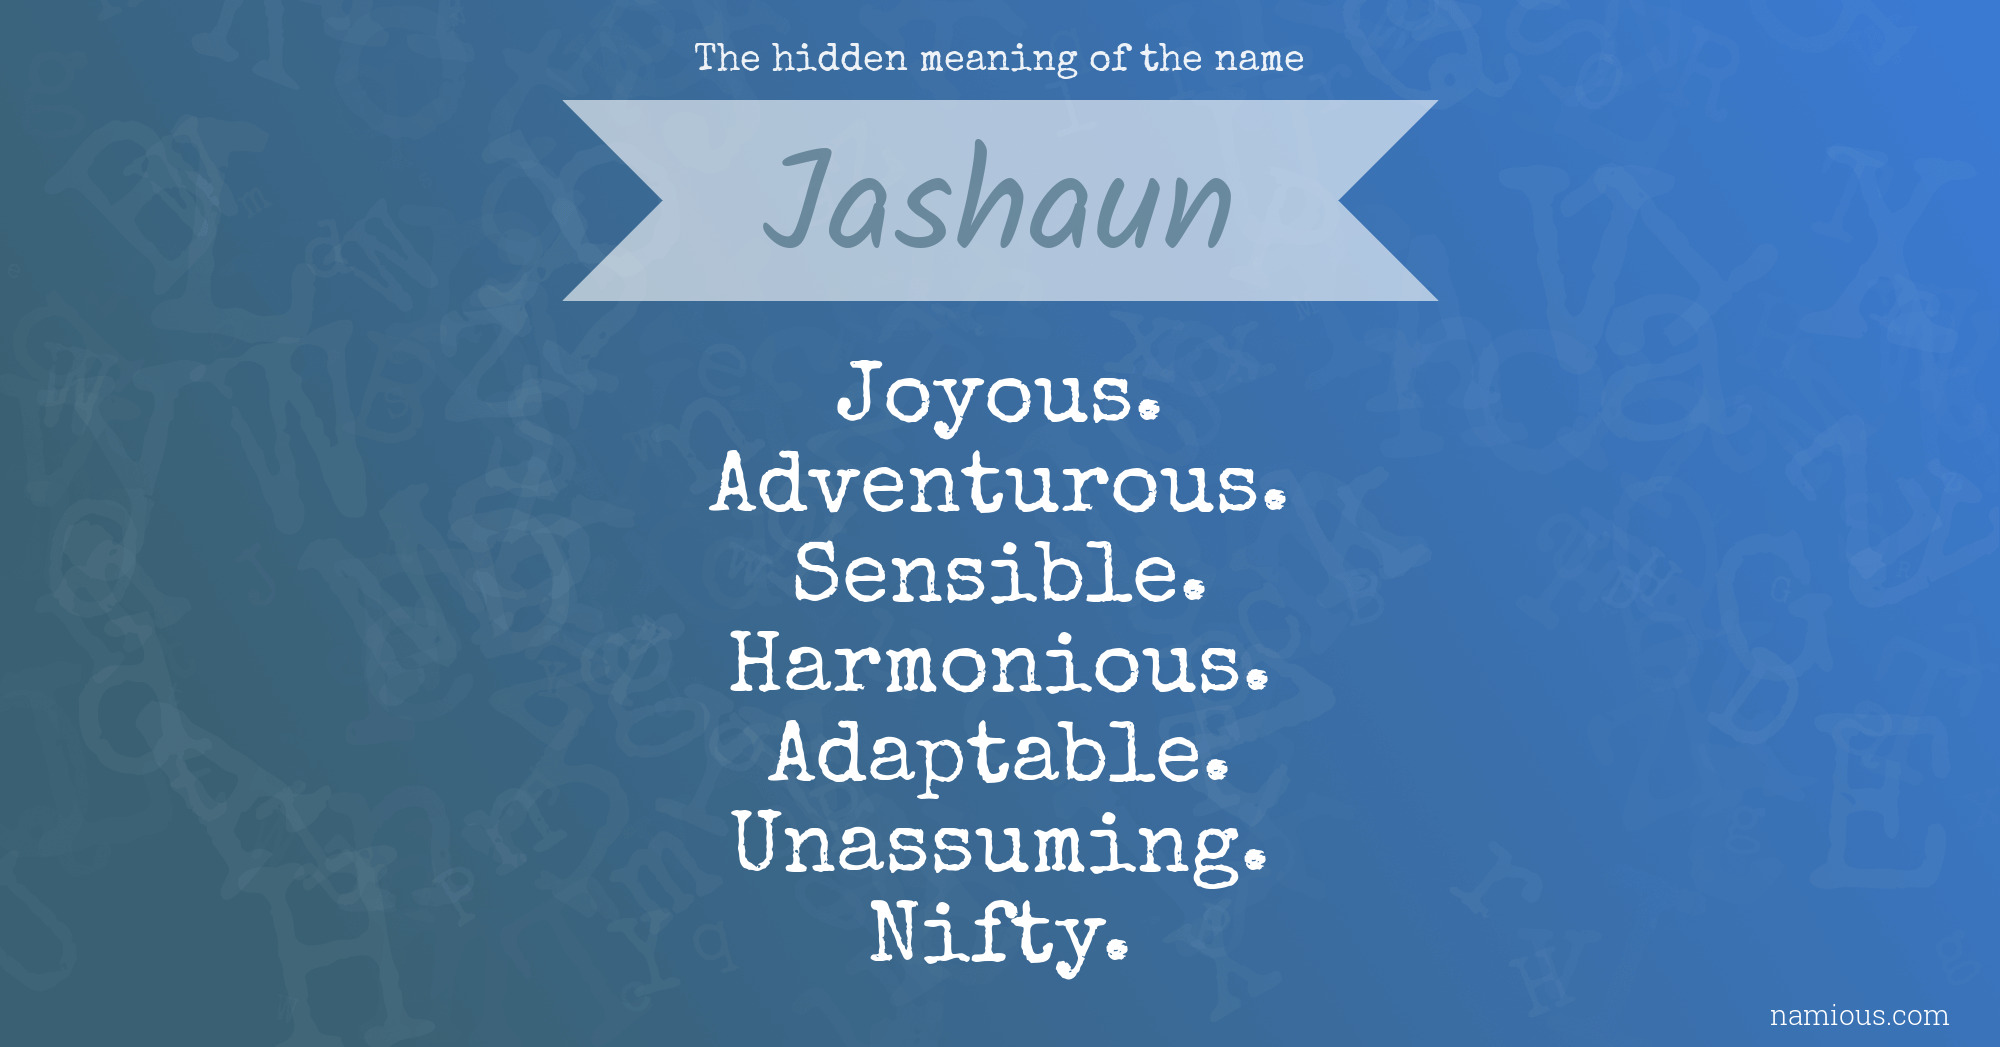 The hidden meaning of the name Jashaun